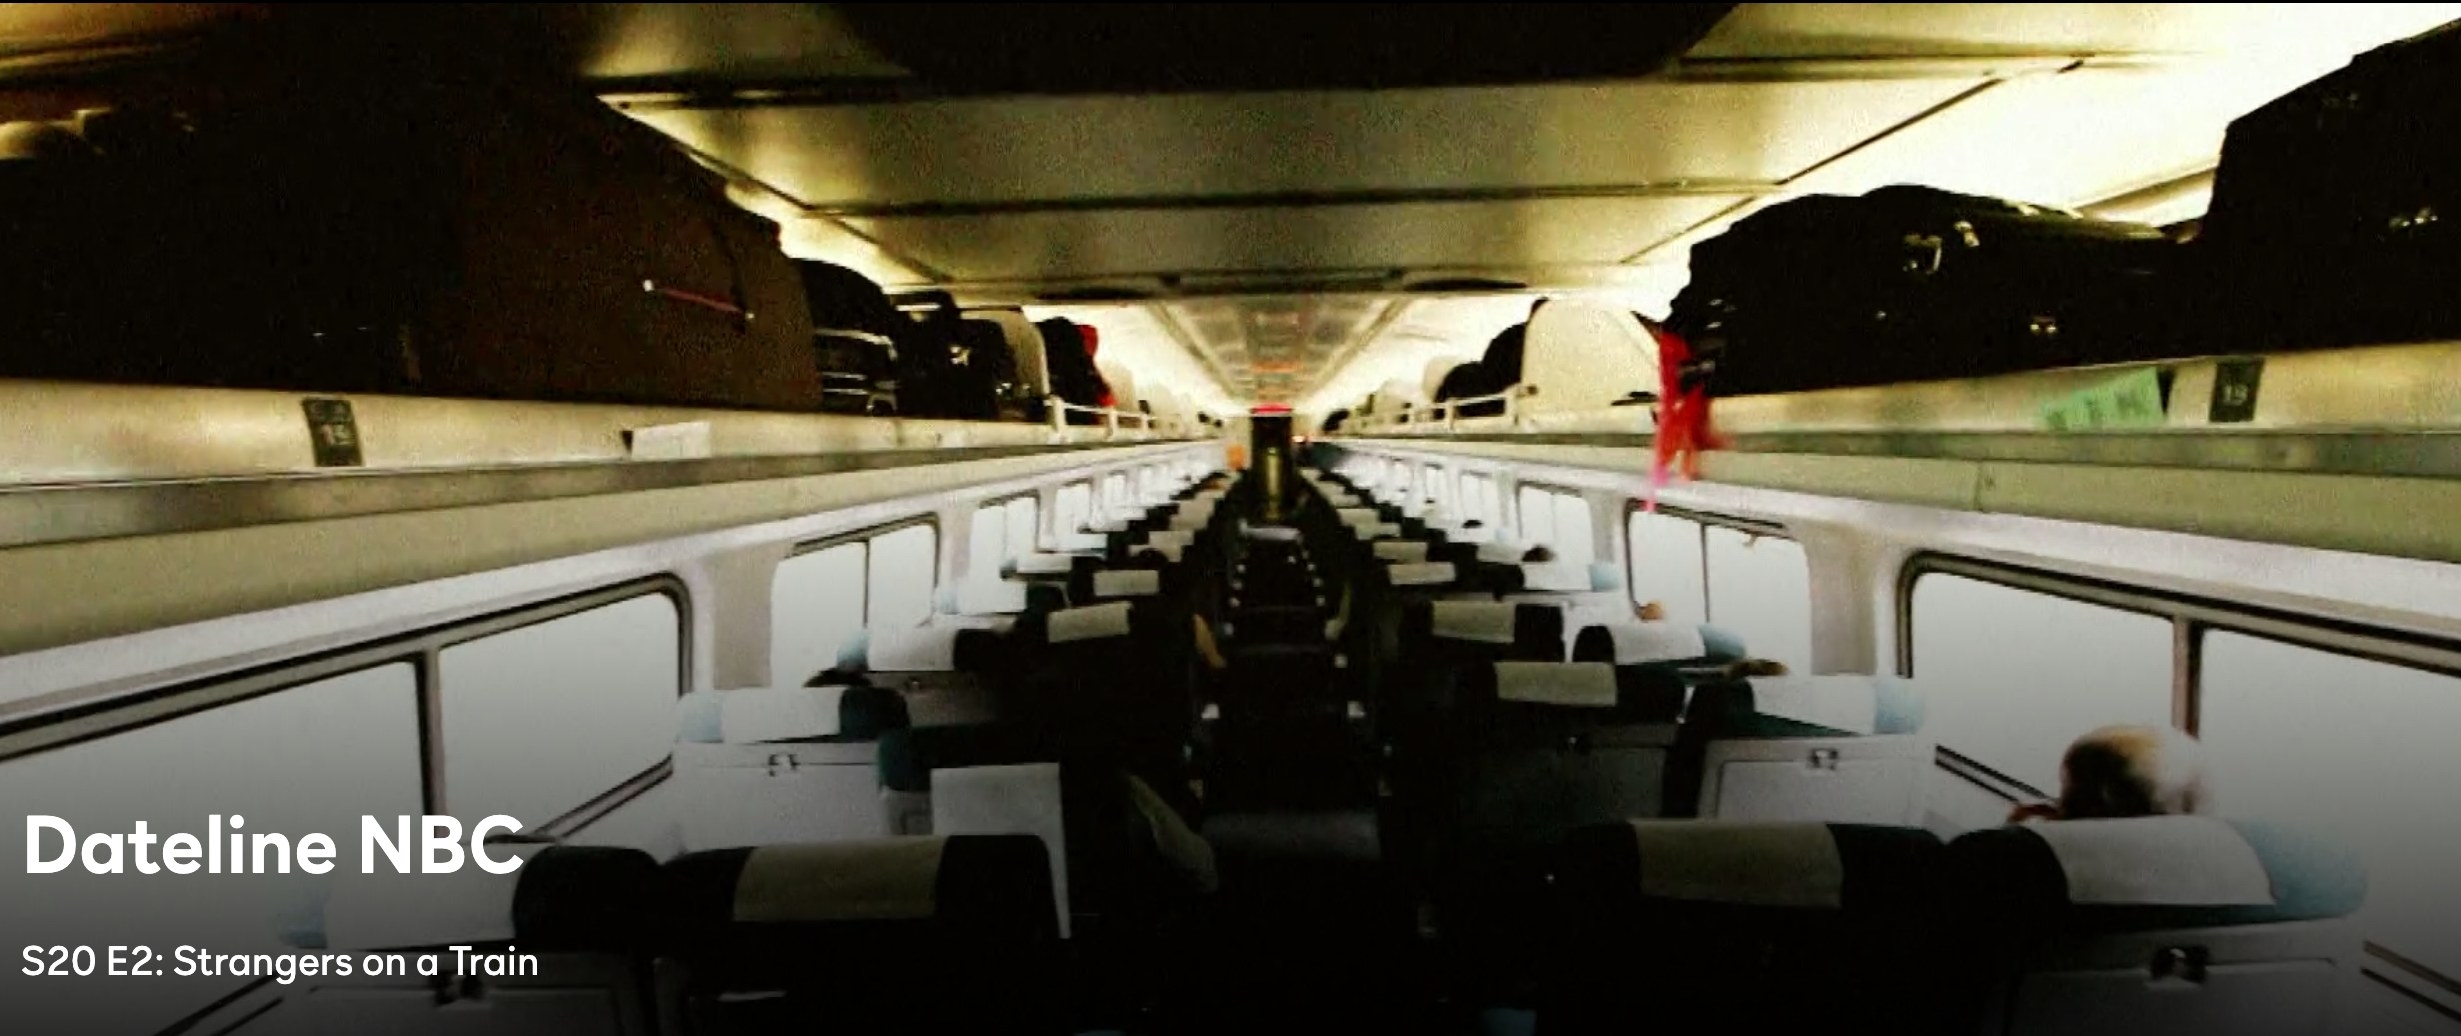 A still from Dateline featuring the inside of a mostly empty train